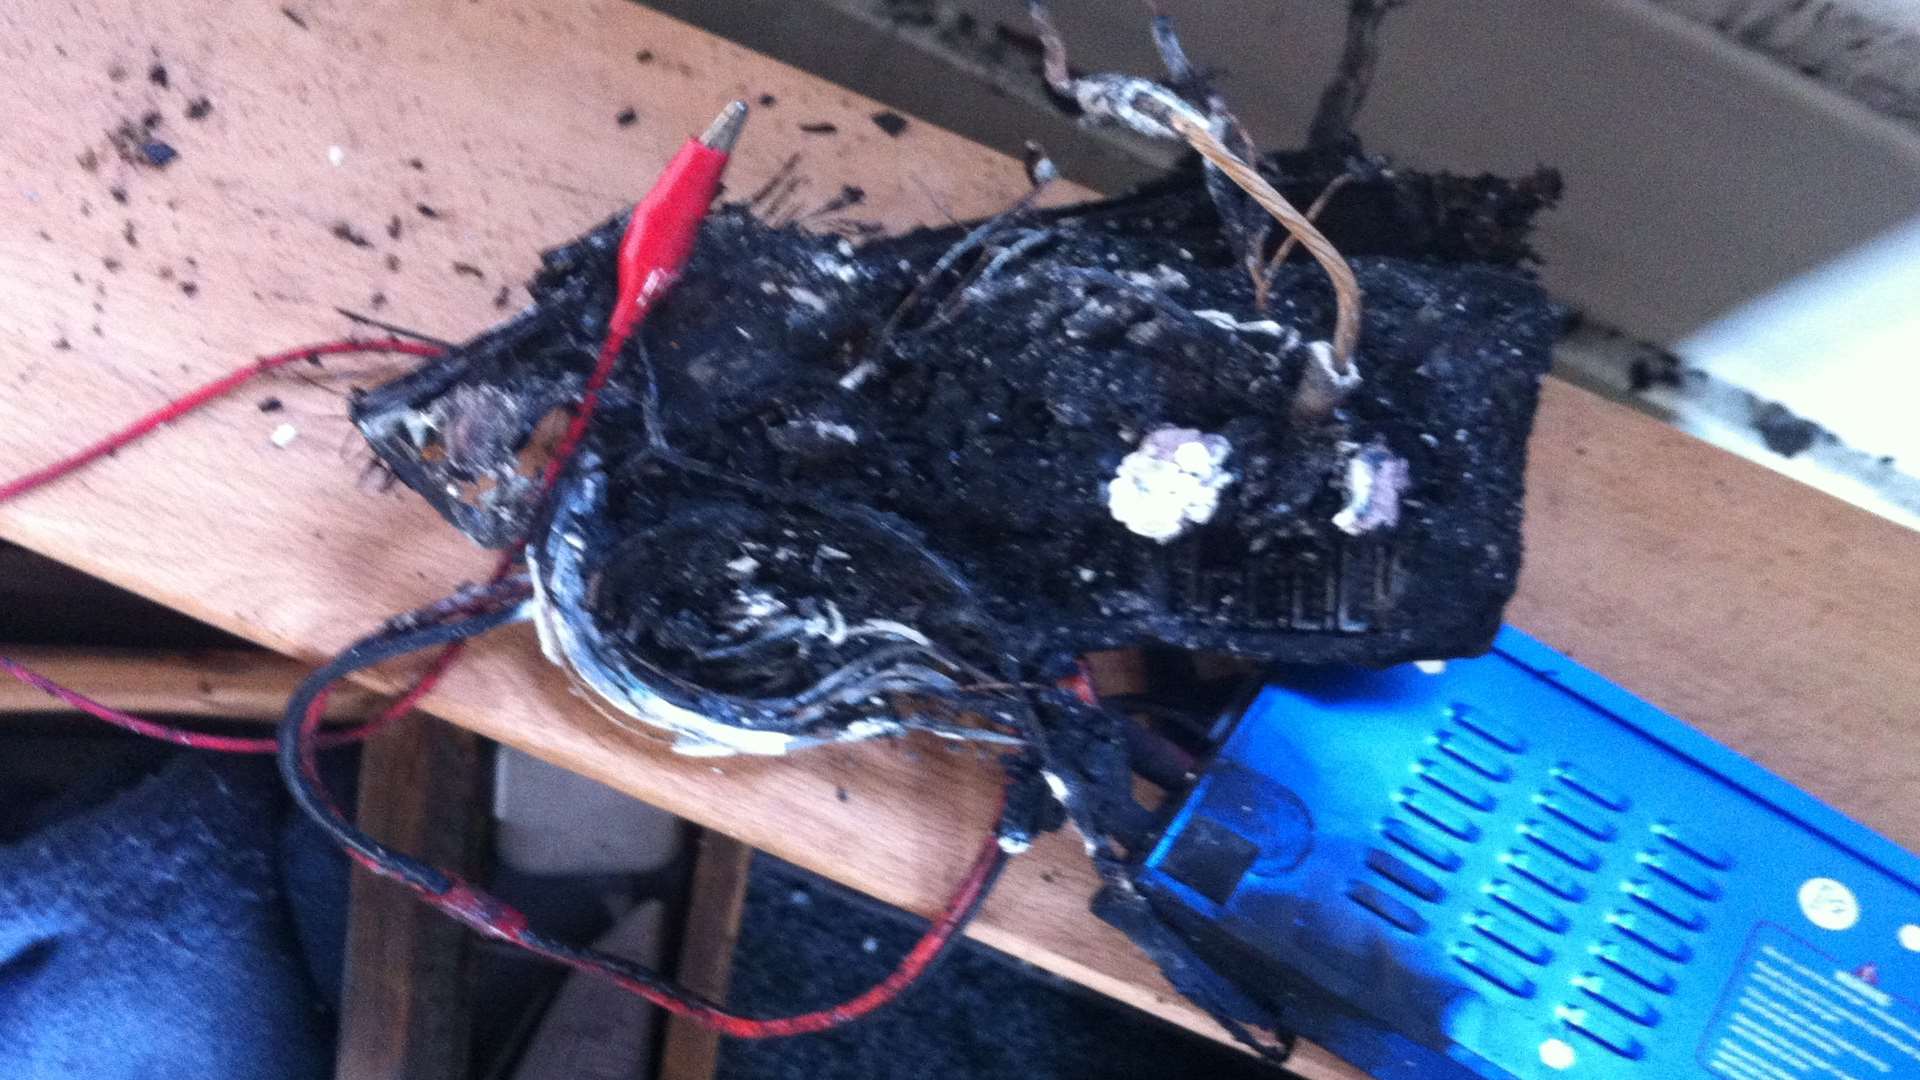 The battery charger for Harry Butler's remote control car caught alight